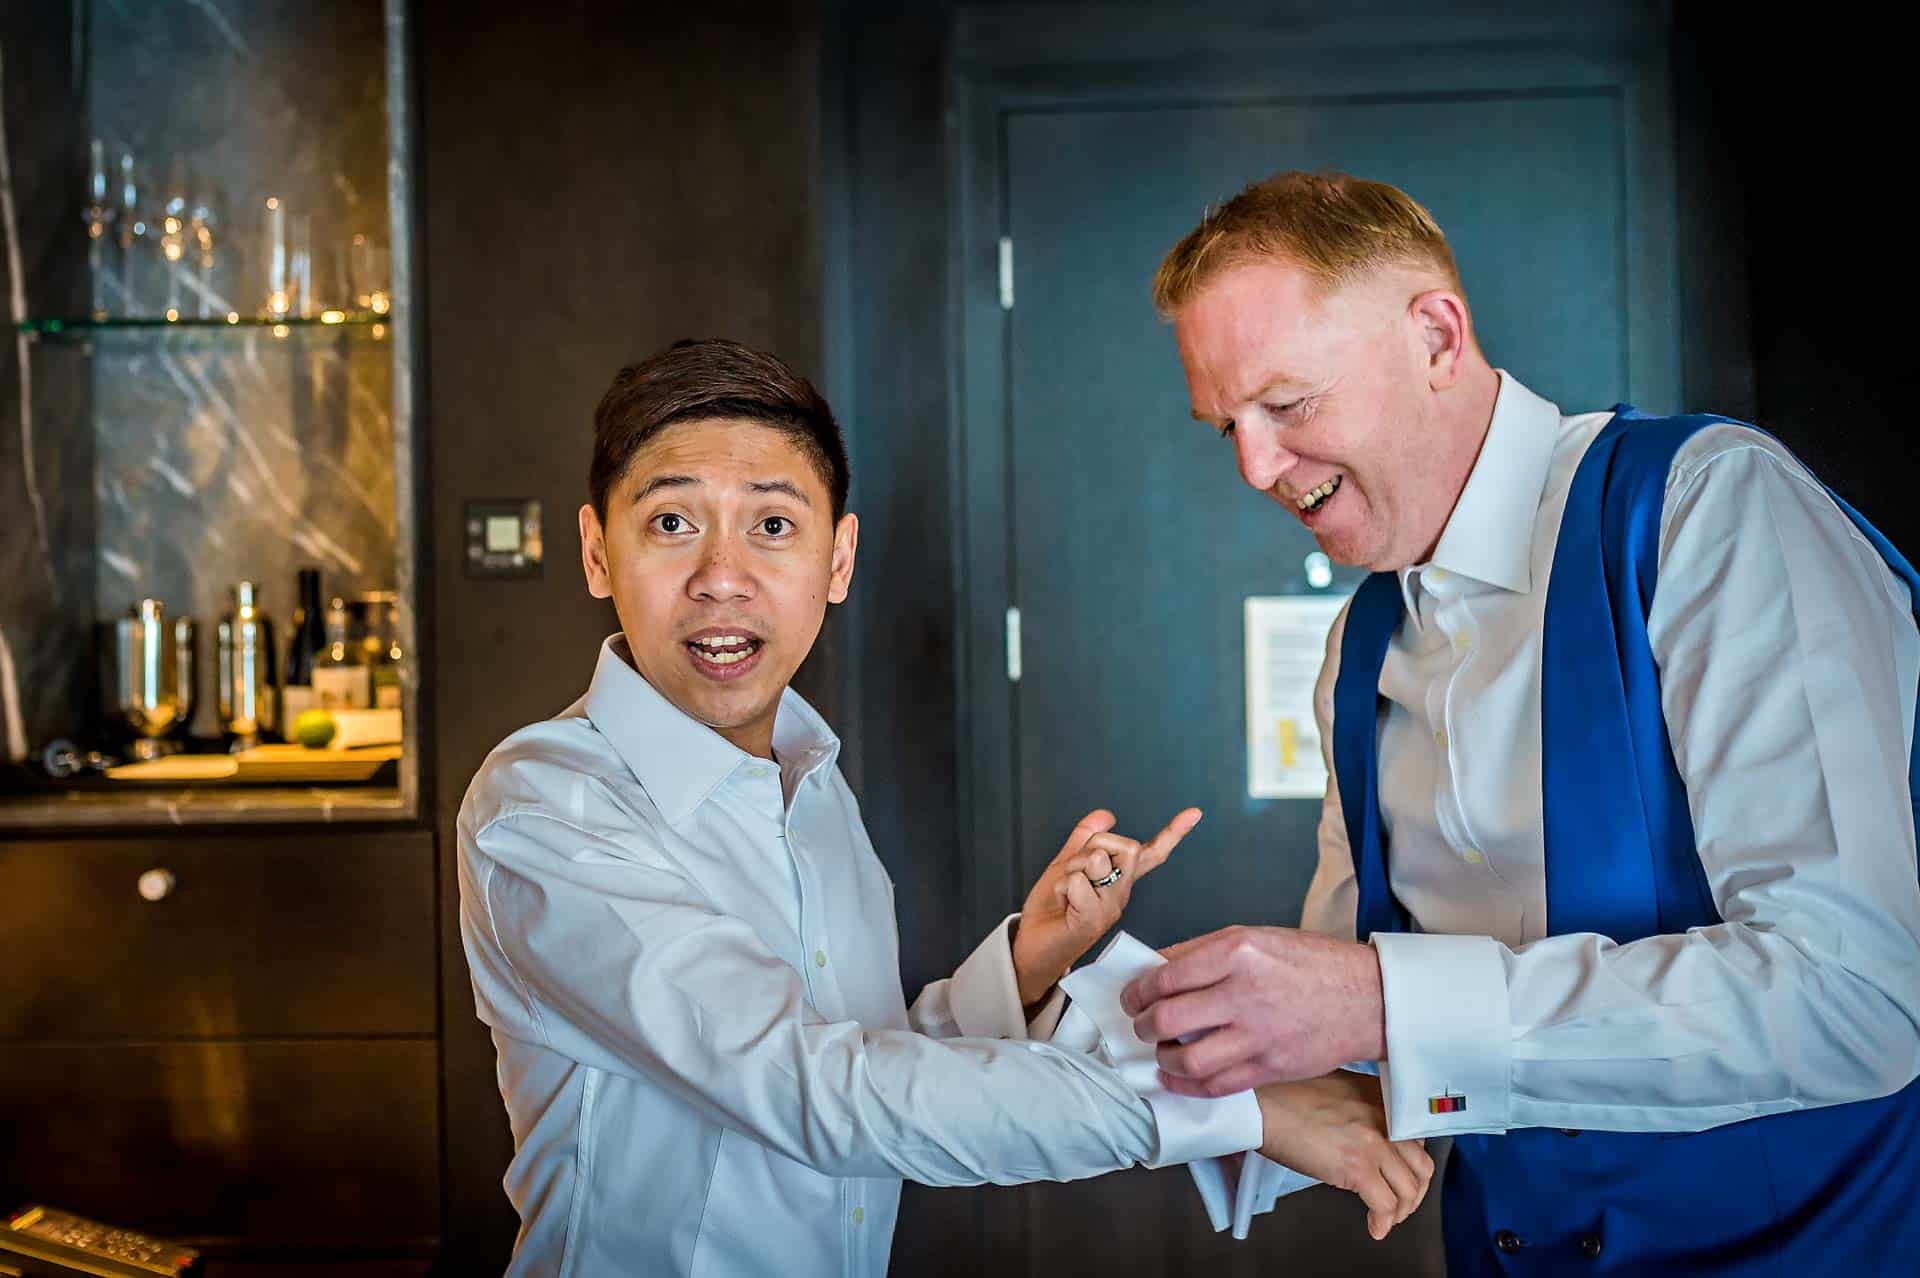 Groom pointing at groom whilst having his cuffs buttoned at gay wedding preparations